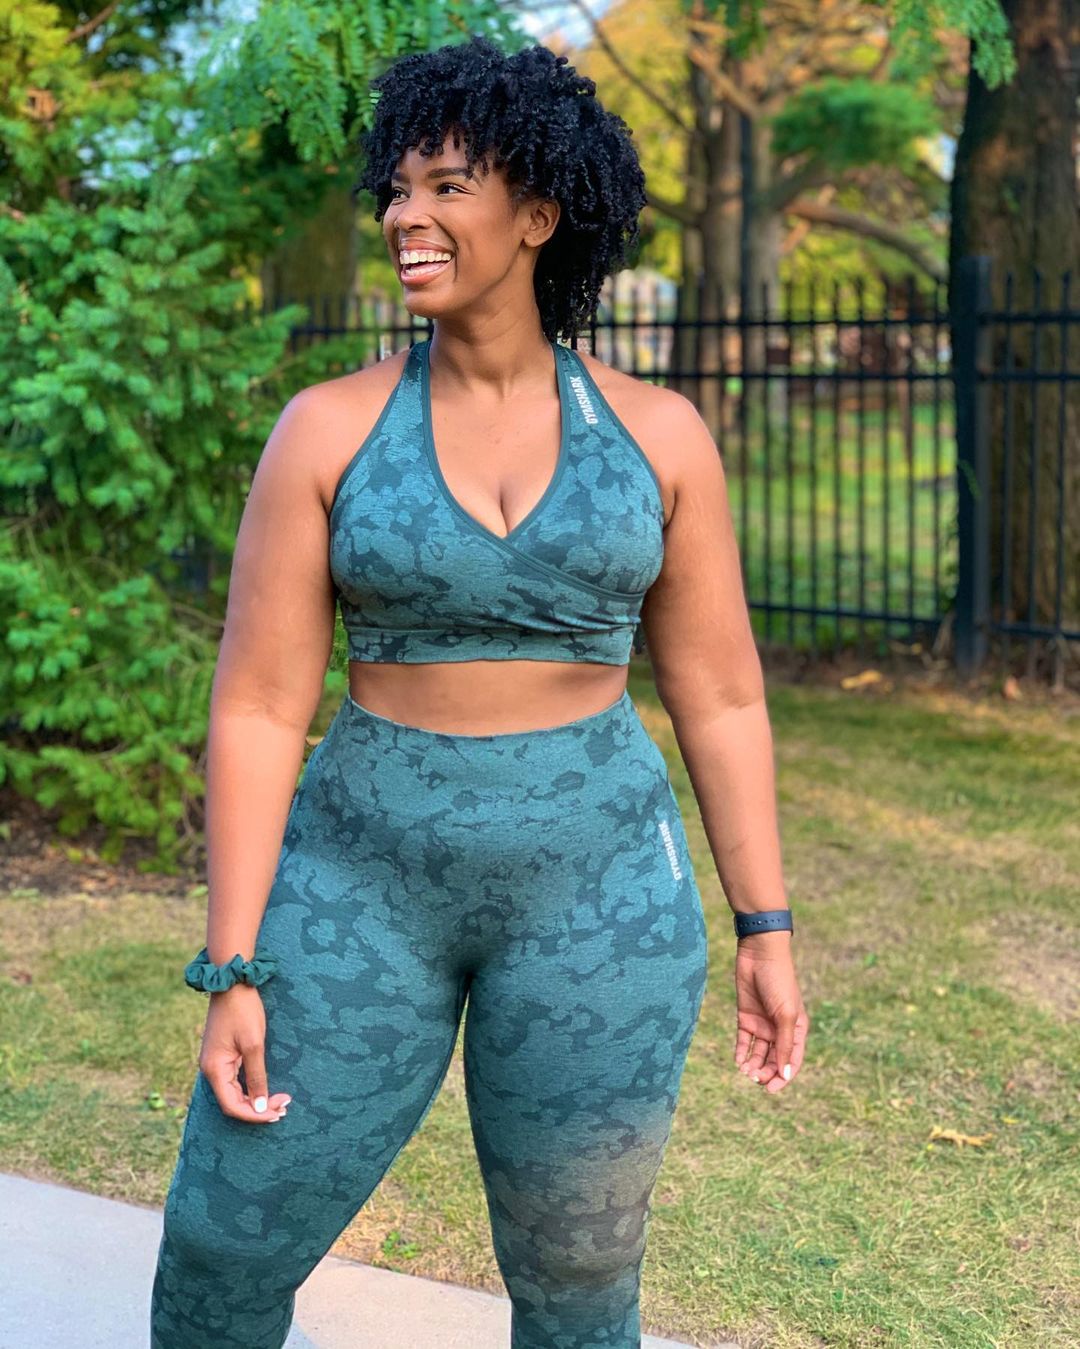 5 fitness influencers to follow for home workout inspo